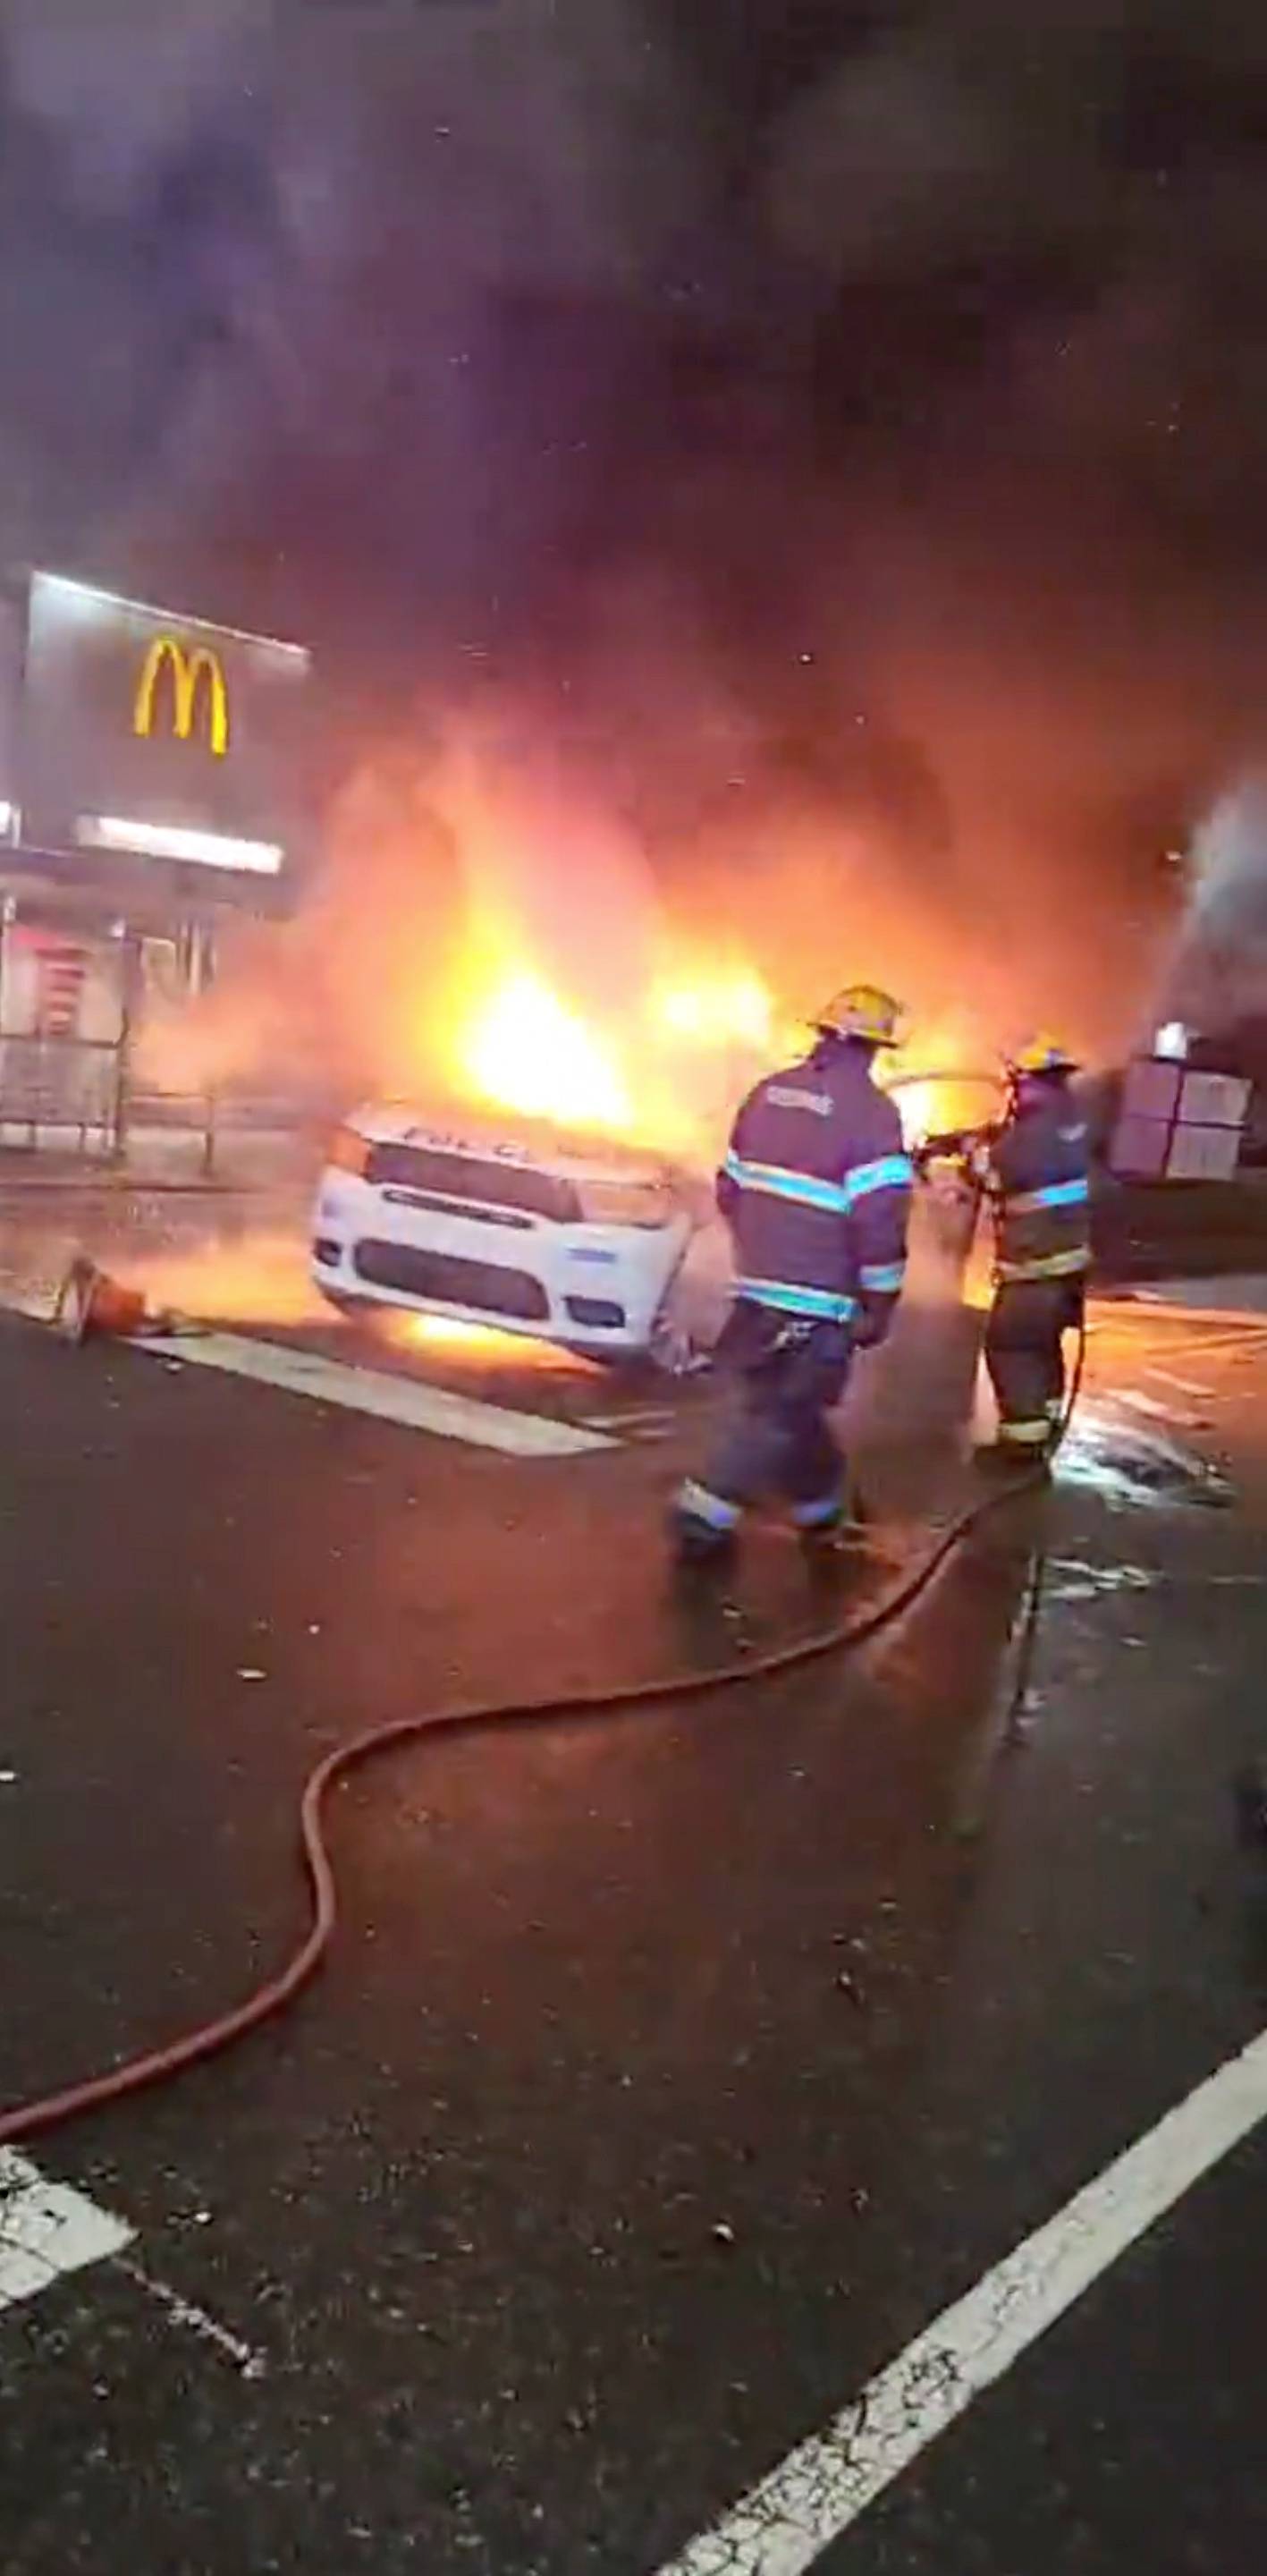 Police vehicle burns during protests after police shooting death of Wallace Jr. in Philadelphia, Pennsylvania